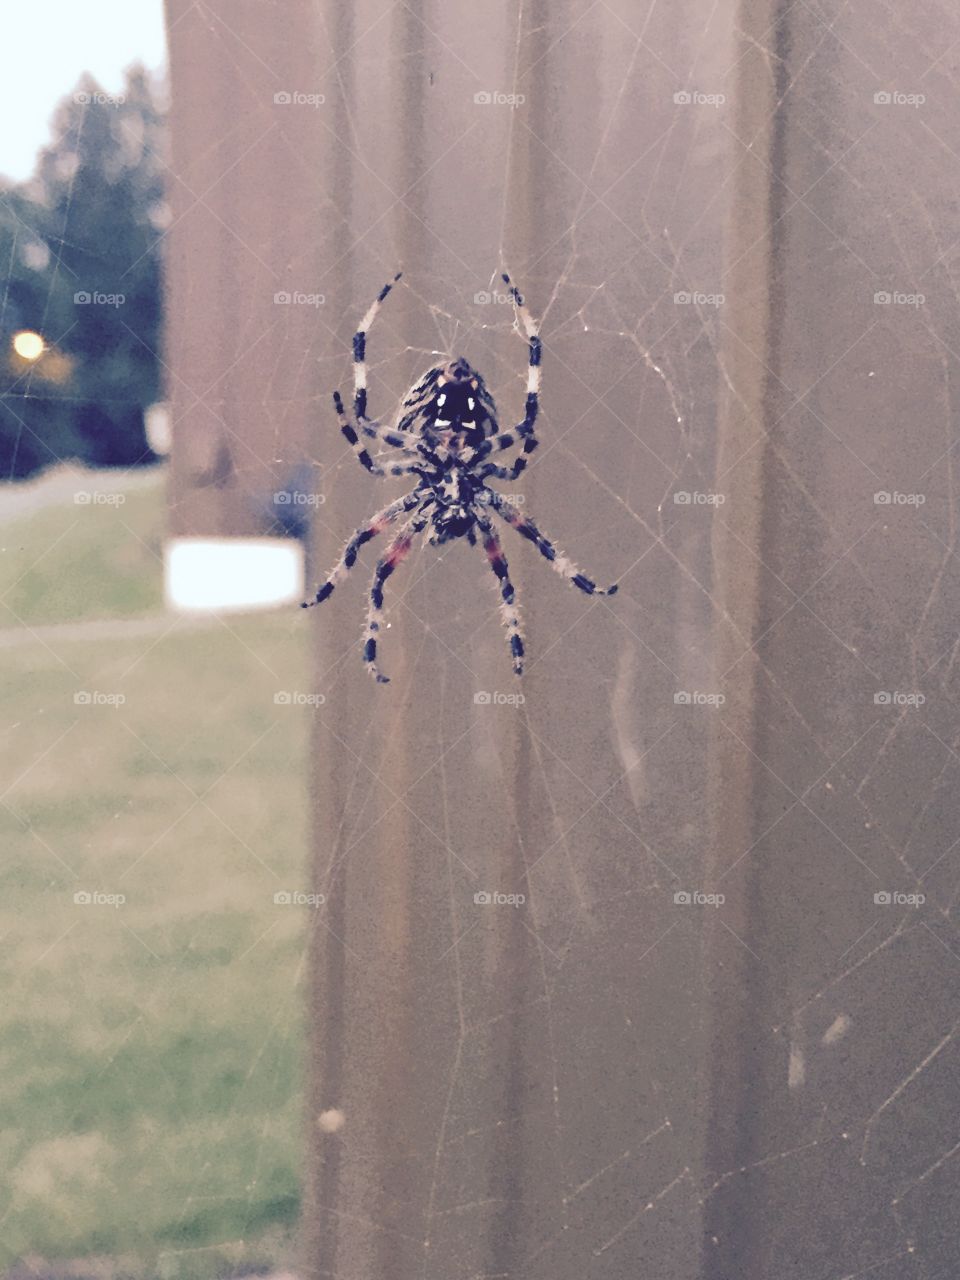 Spider, Nature, Outdoors, No Person, Winter